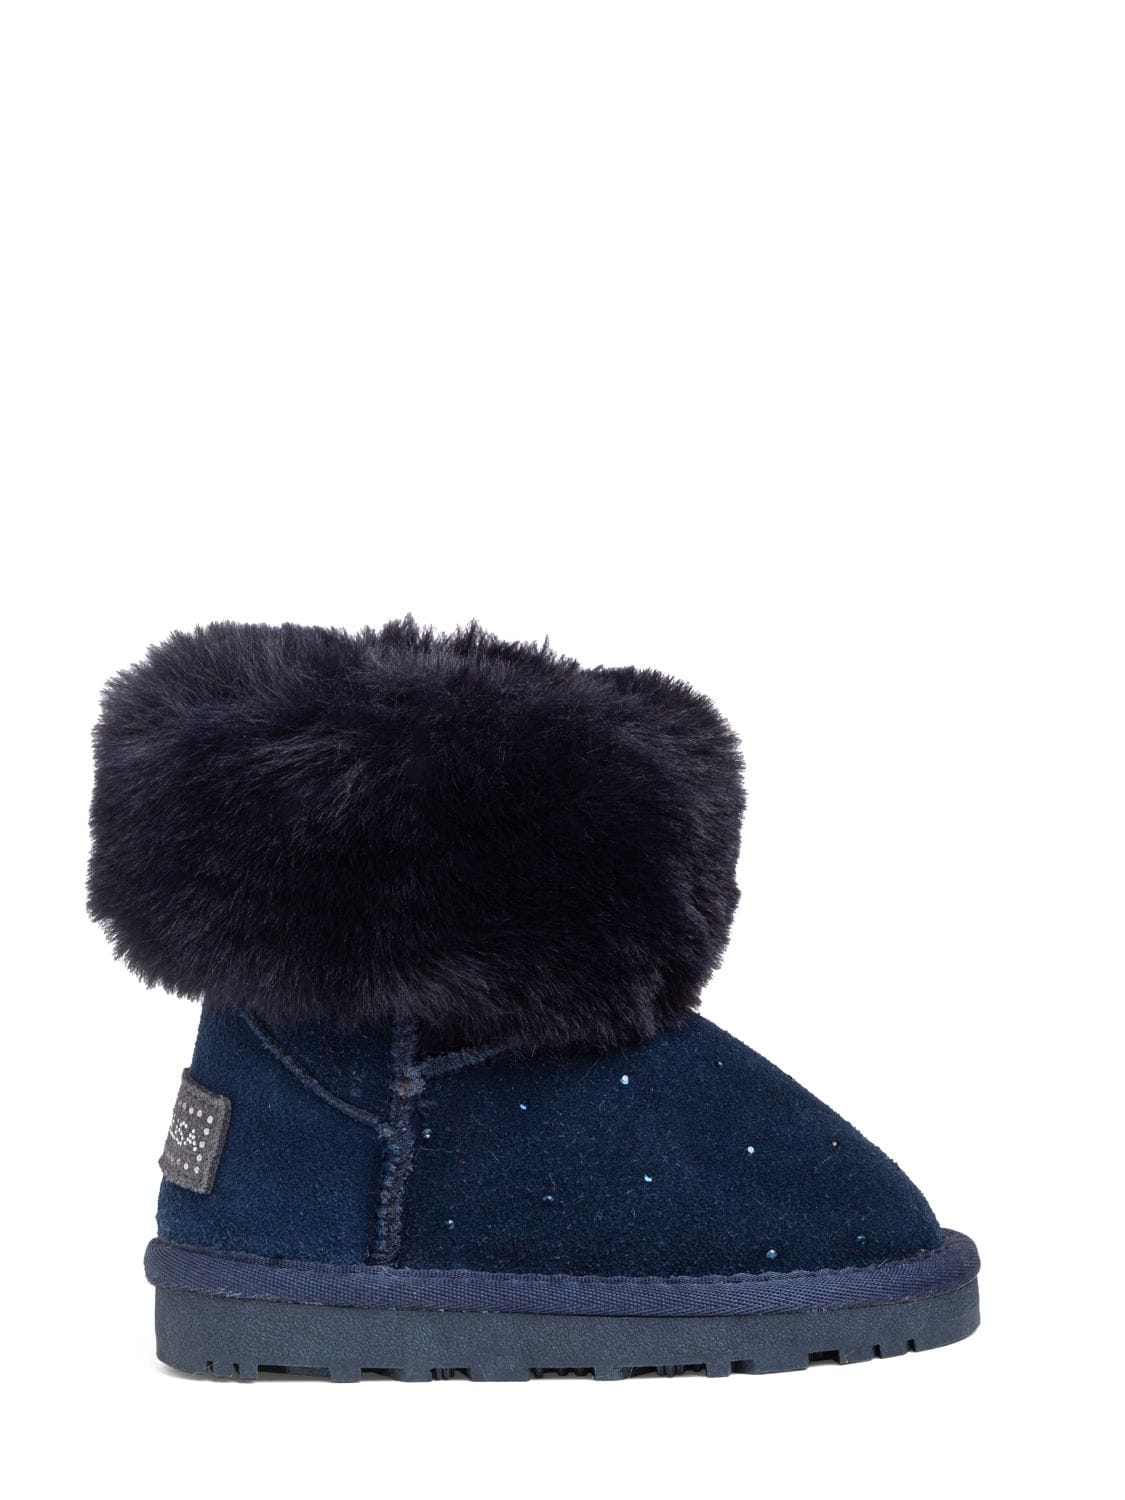 Monnalisa Kids' Embellished Leather & Faux Fur Boots In Navy